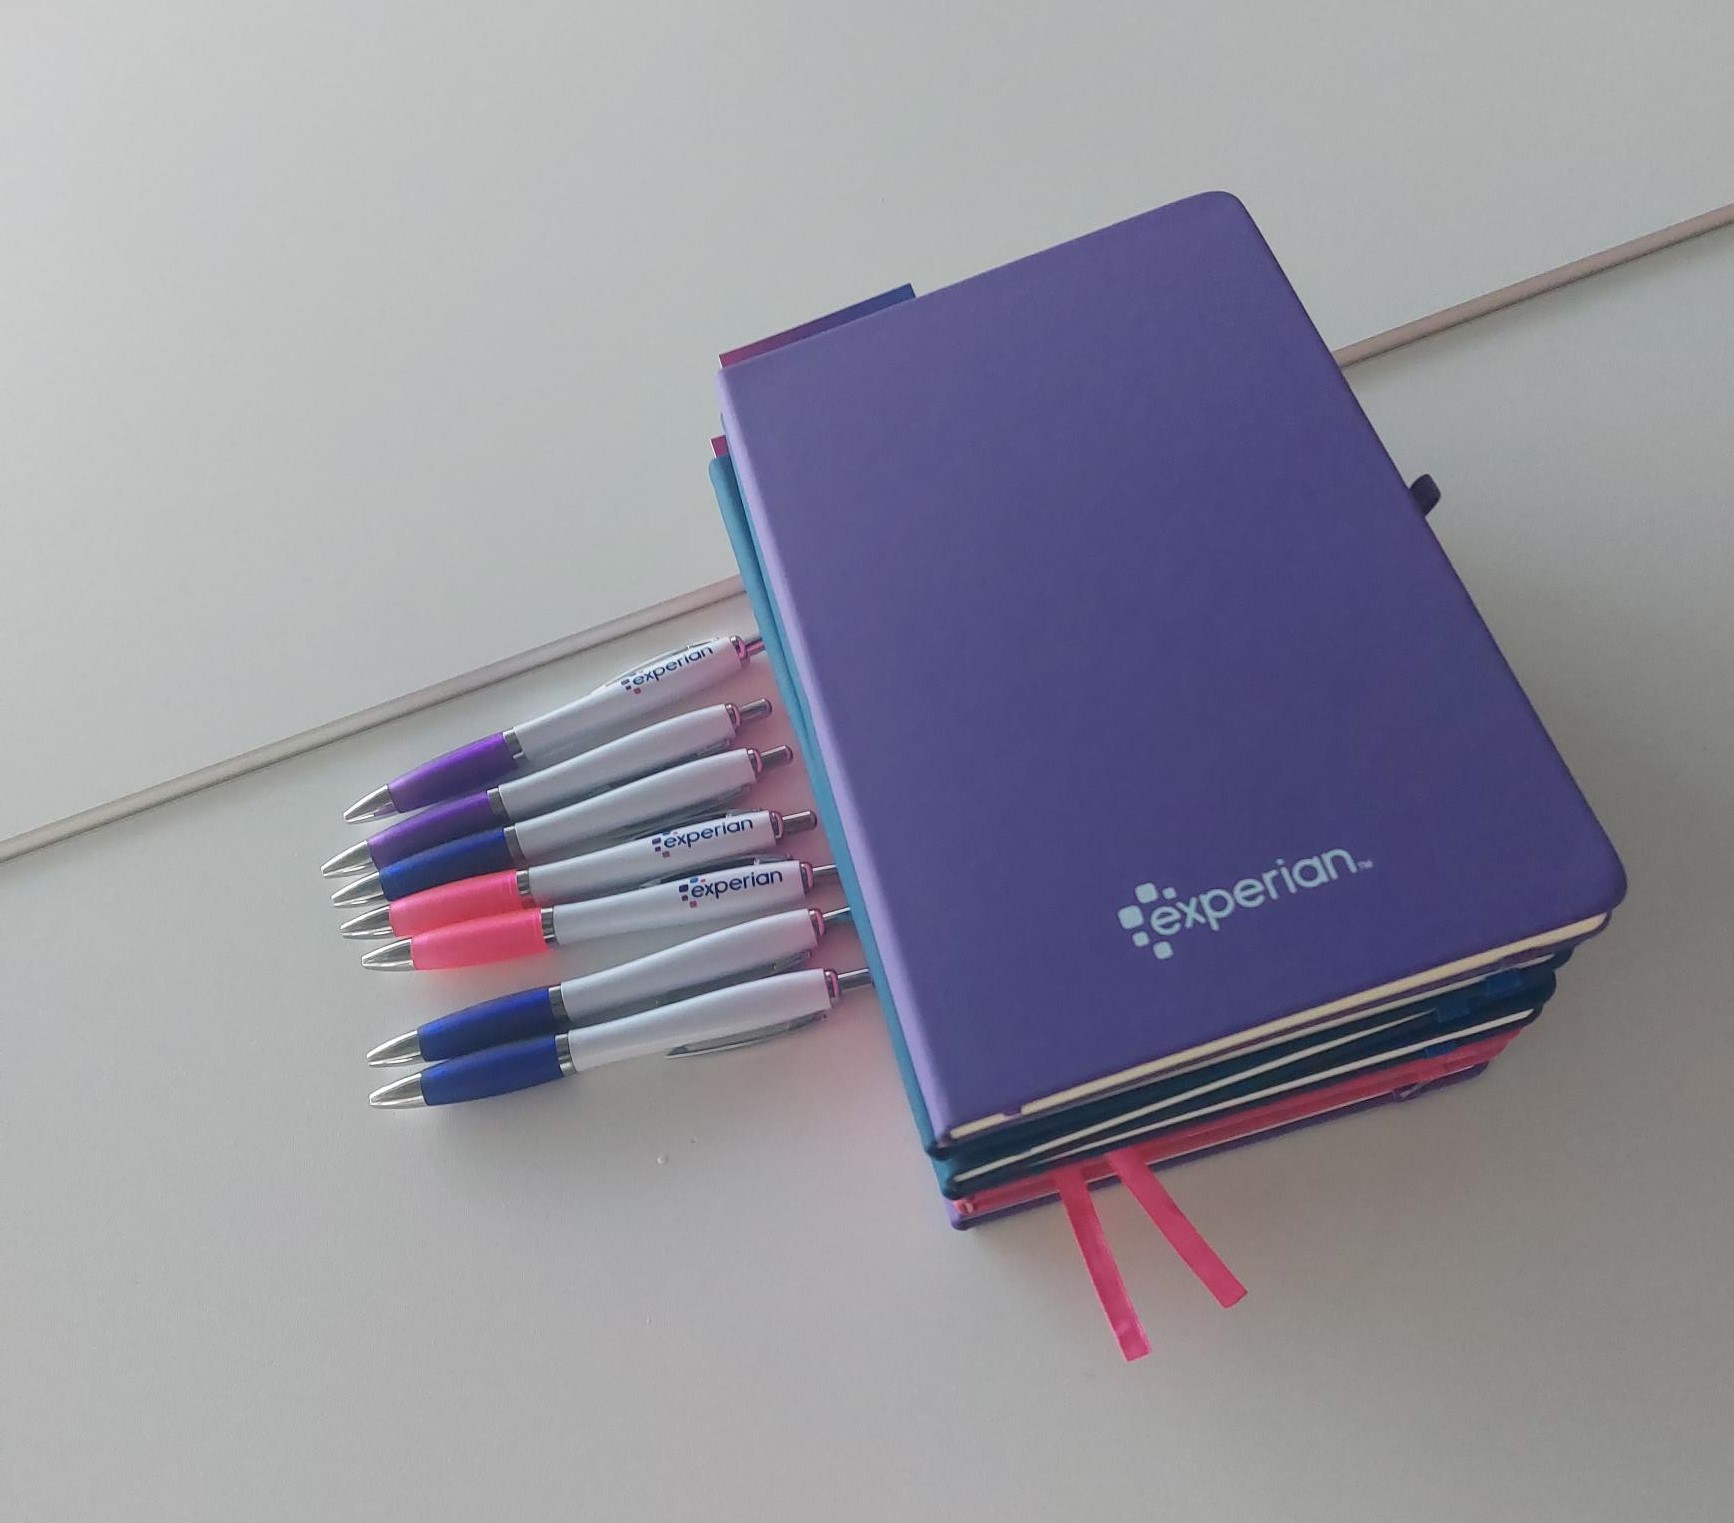 Experian branded notebooks and pens